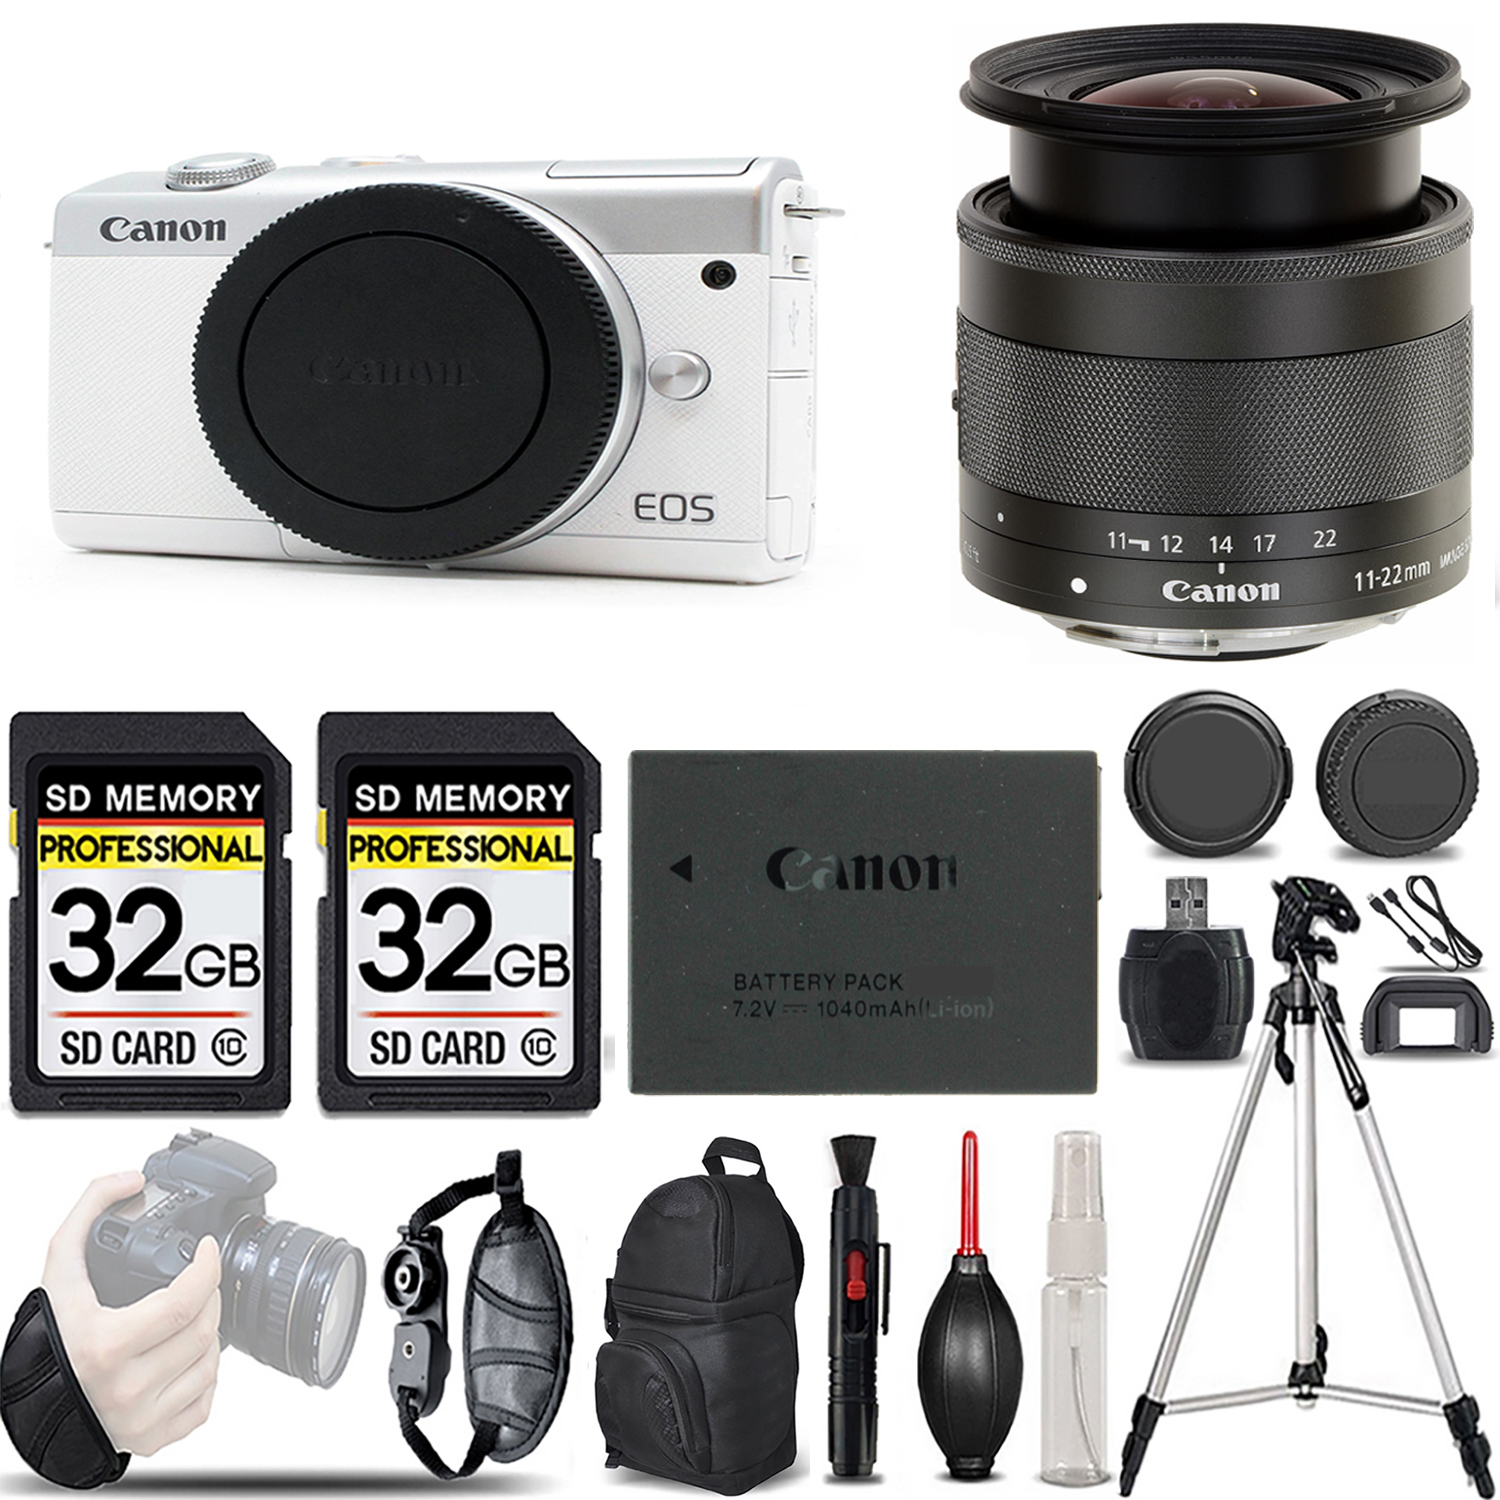 EOS M200  Camera (White) + 11-22mm f/4-5.6 IS STM Lens - LOADED KIT *FREE SHIPPING*